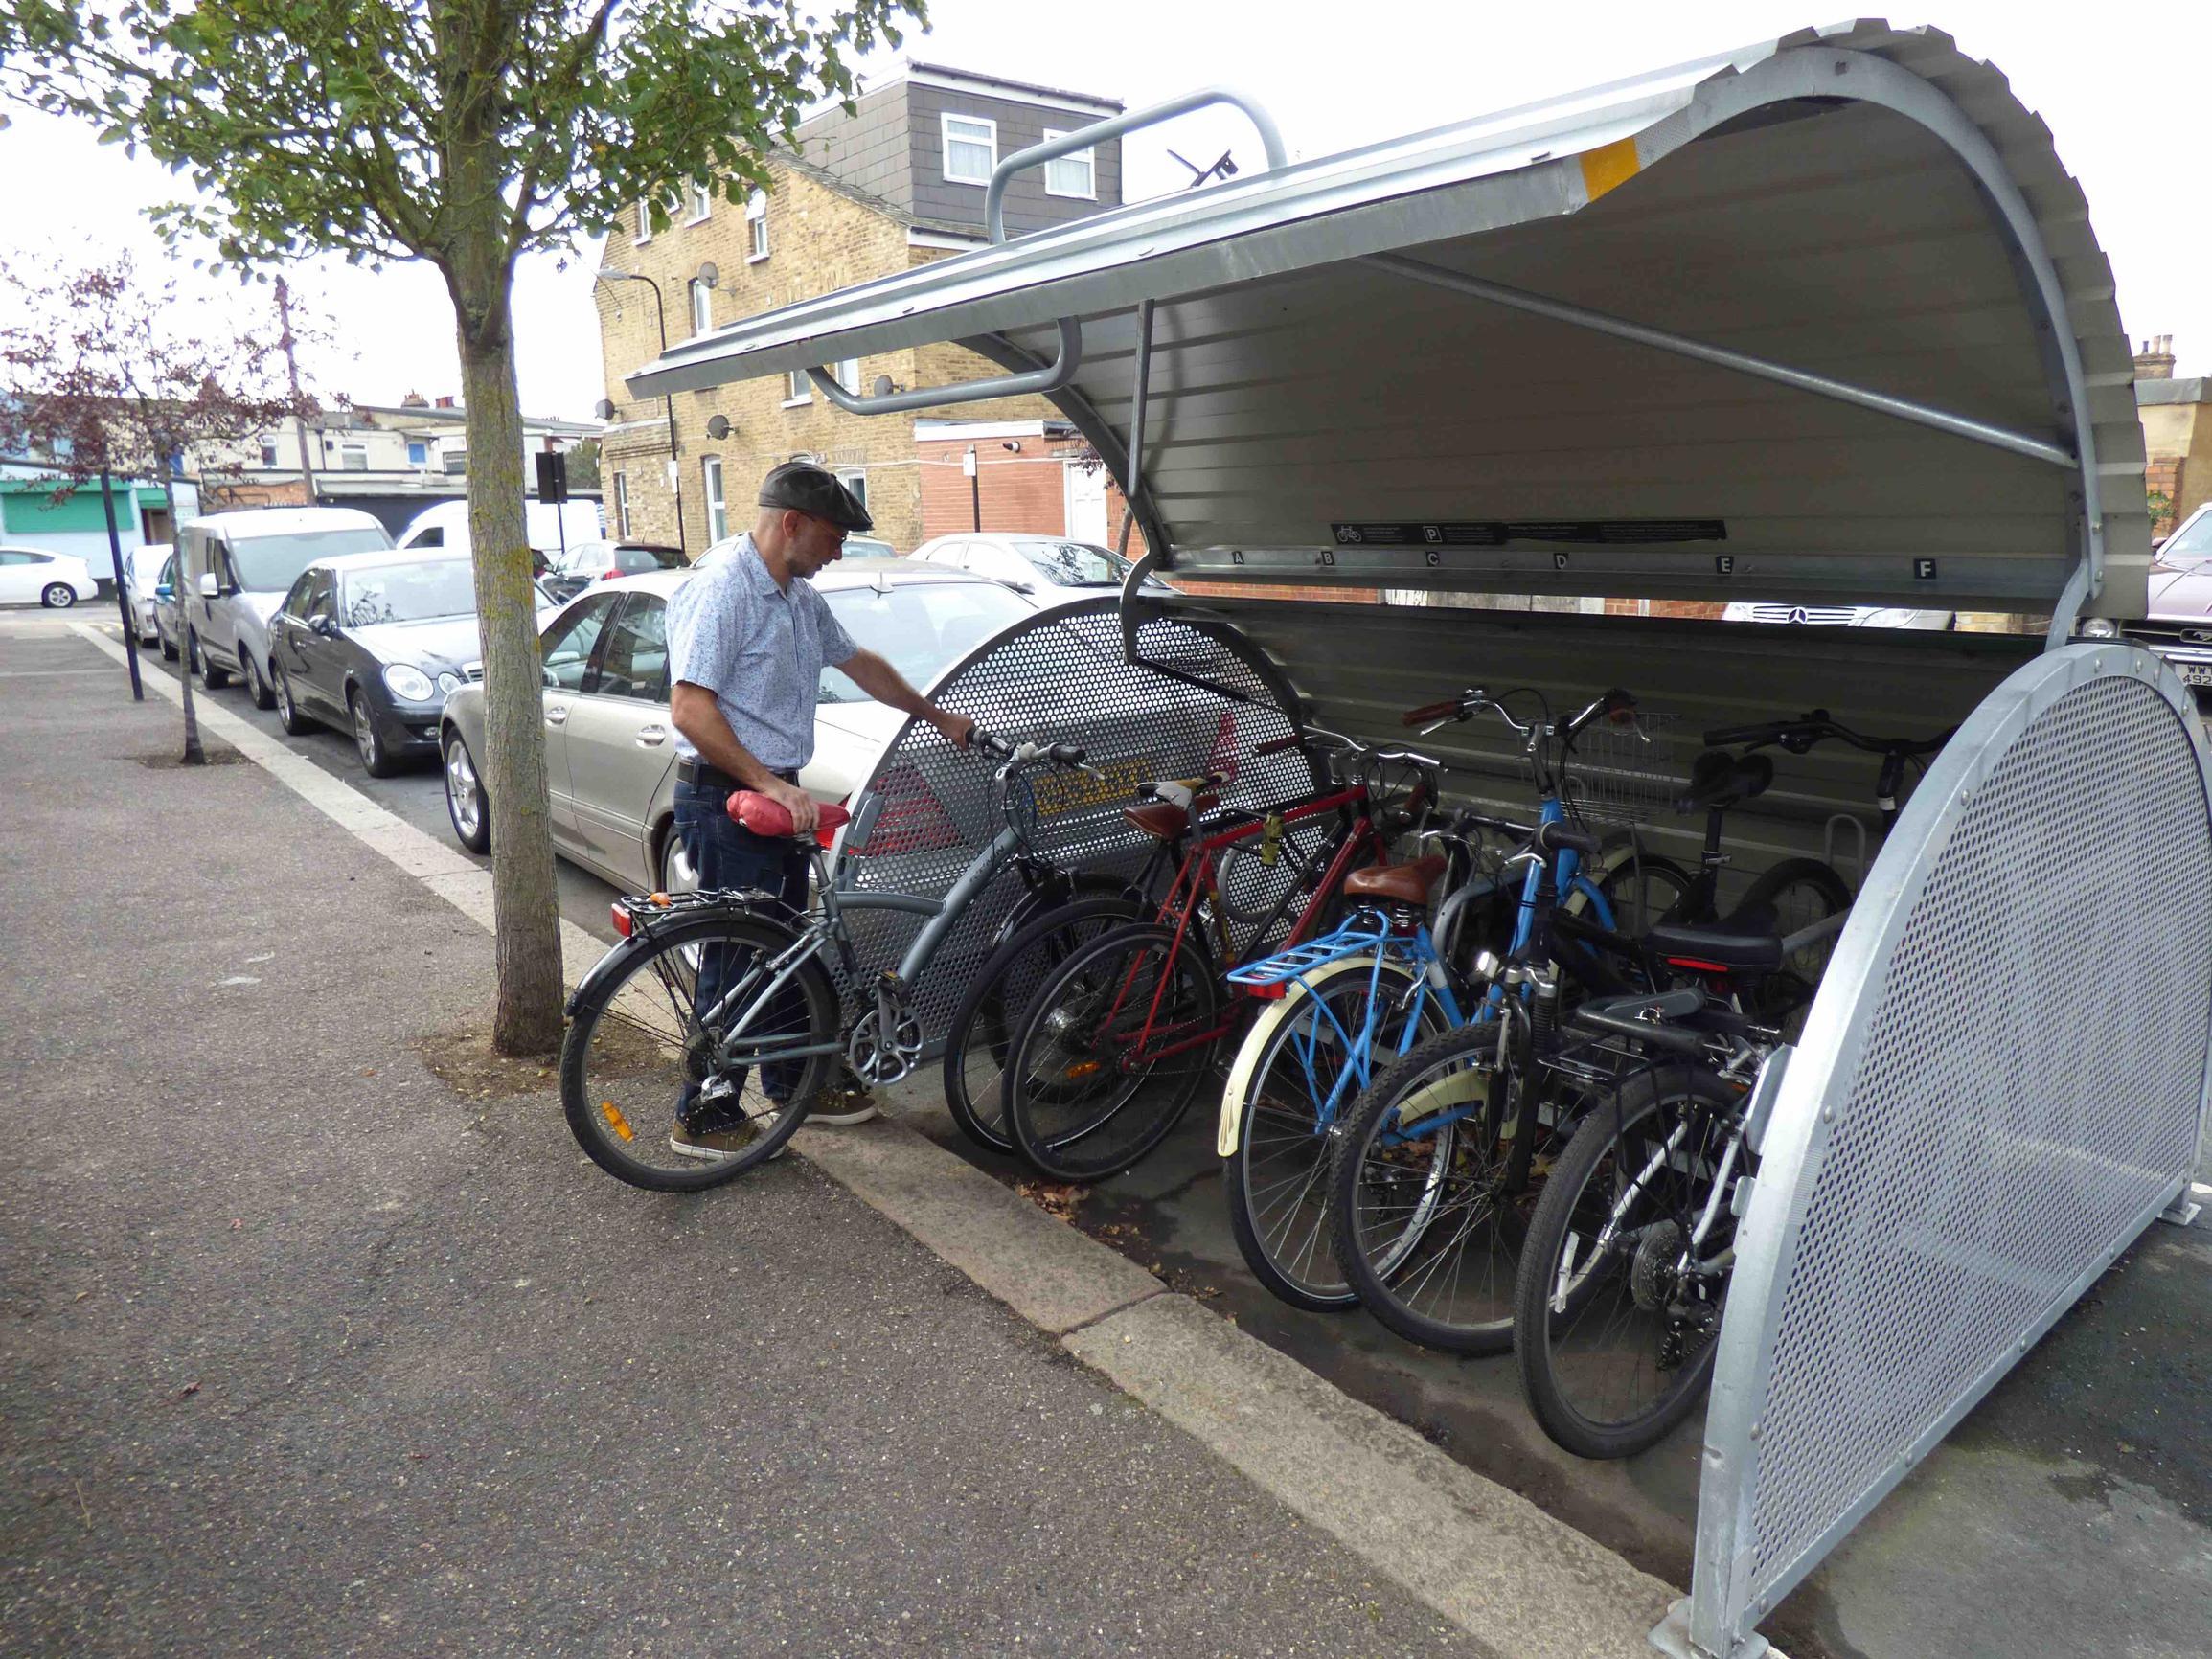 Waltham Forest to offer Bikehangar spaces for over 3,500 cycles